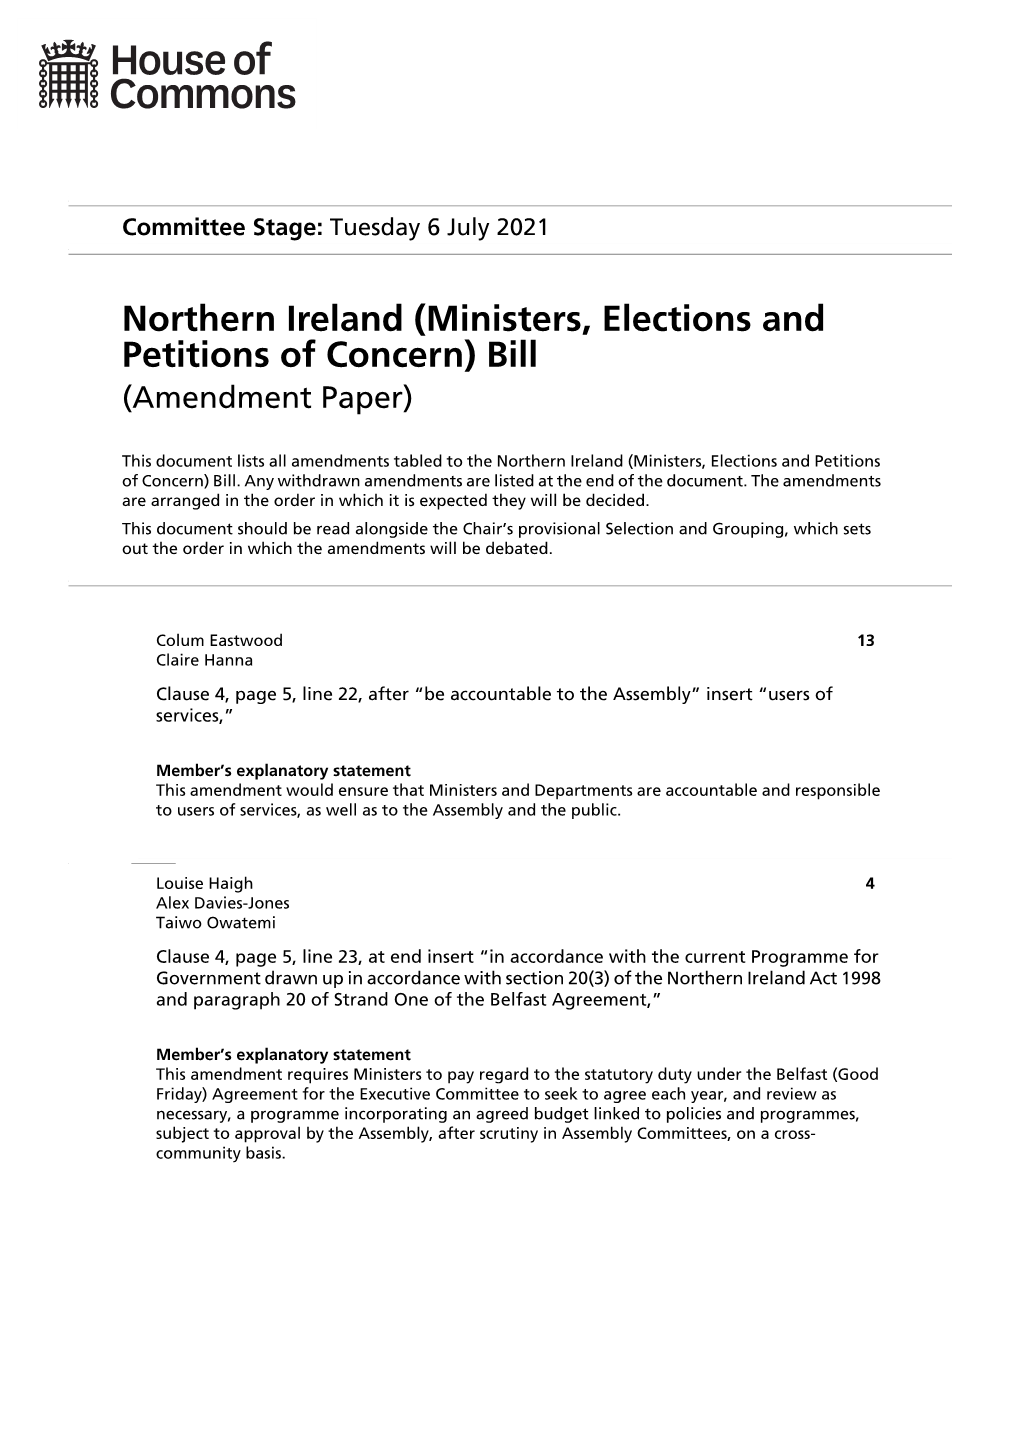 Northern Ireland (Ministers, Elections and Petitions of Concern) Bill (Amendment Paper)